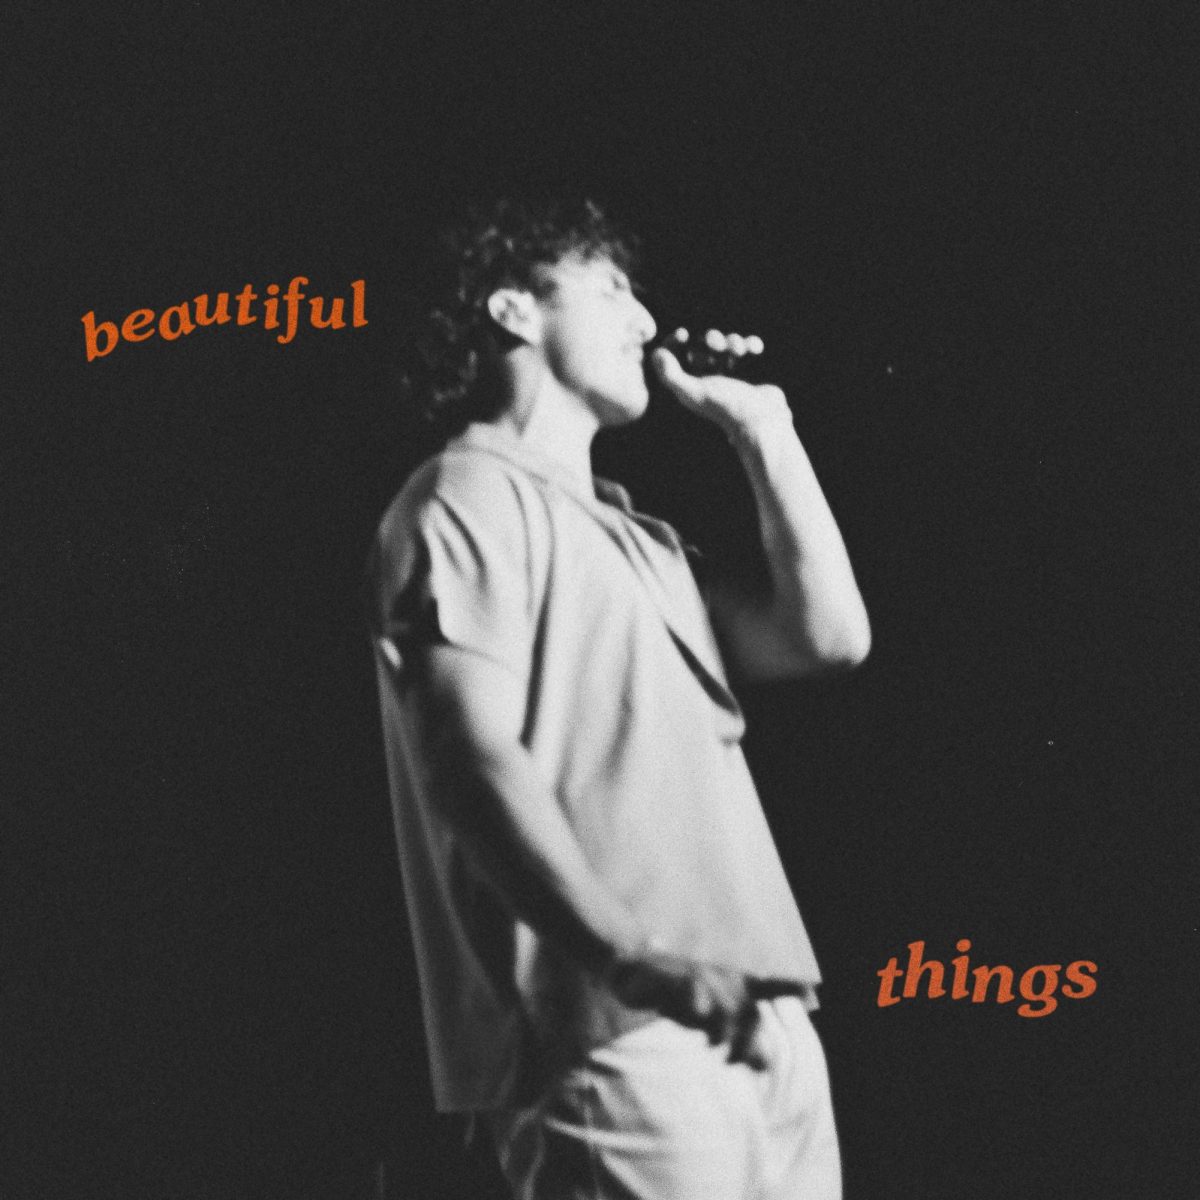 Outside of the United States, Beautiful Things topped the charts in Australia, Canada, Germany, and the United Kingdom.